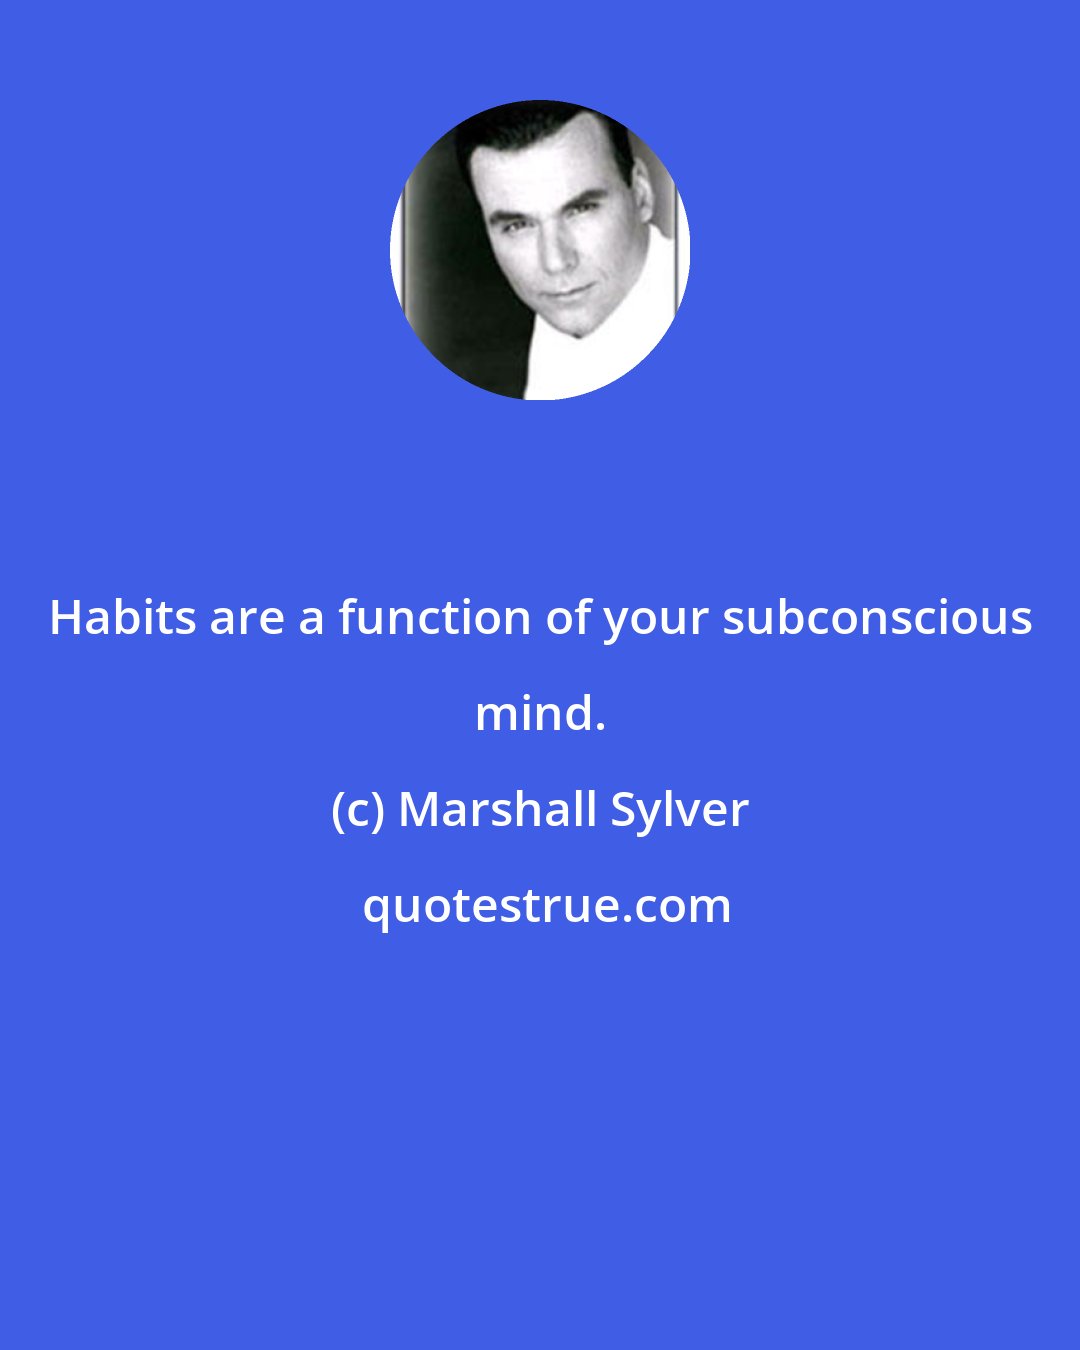 Marshall Sylver: Habits are a function of your subconscious mind.